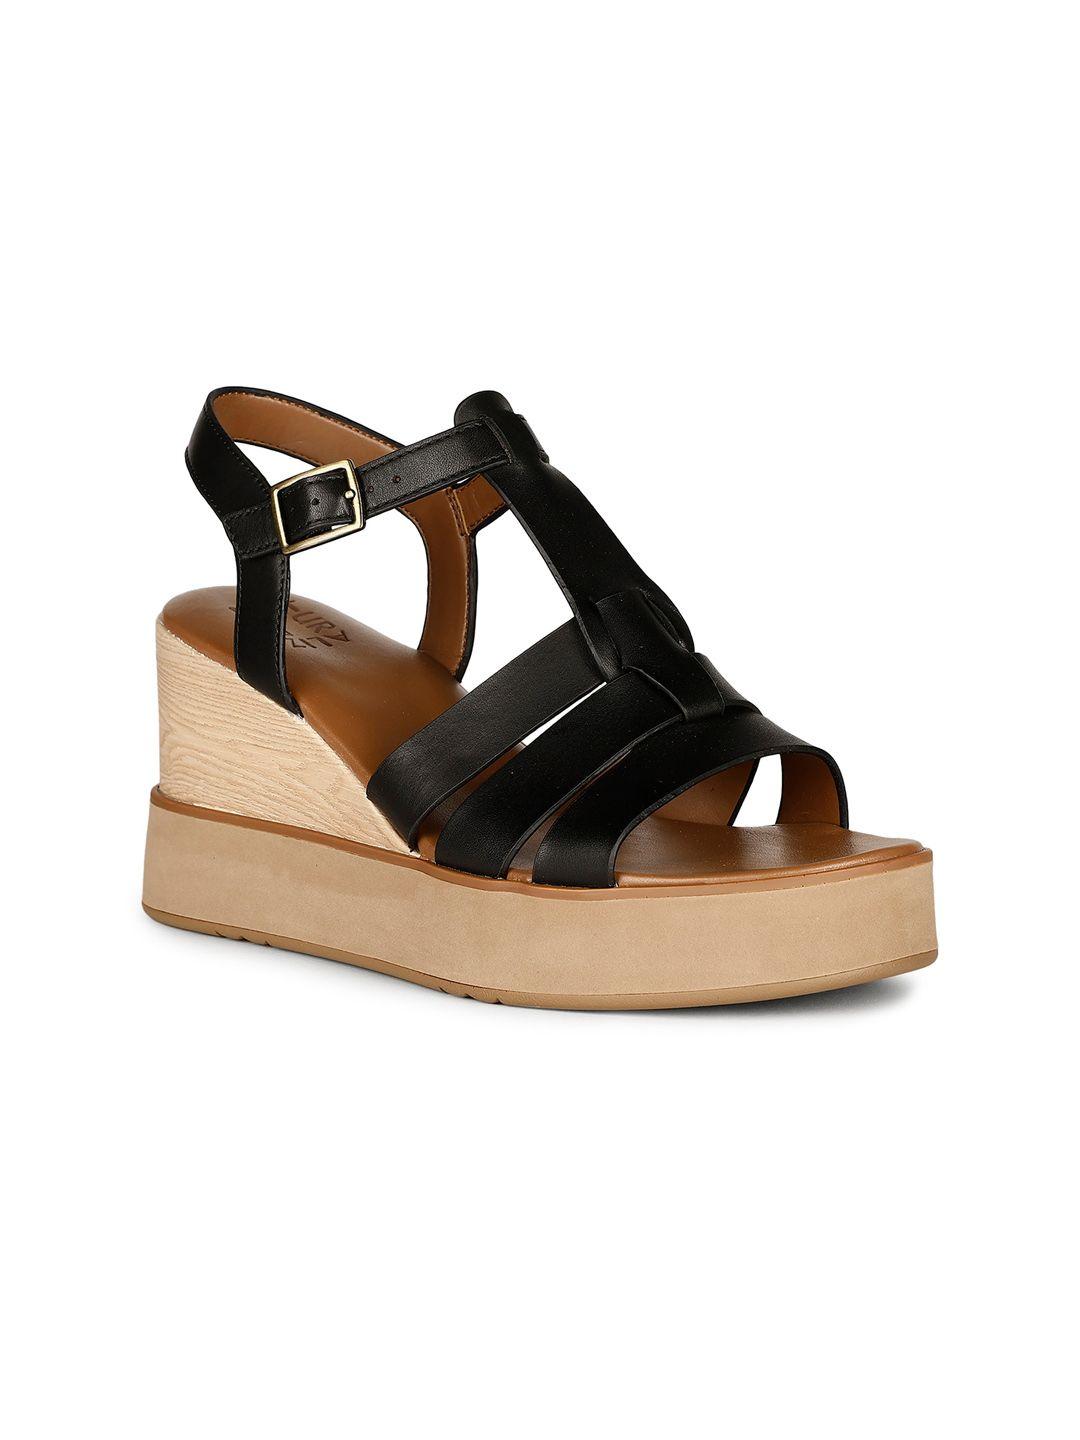 naturalizer barrett open toe leather wedges with backstrap